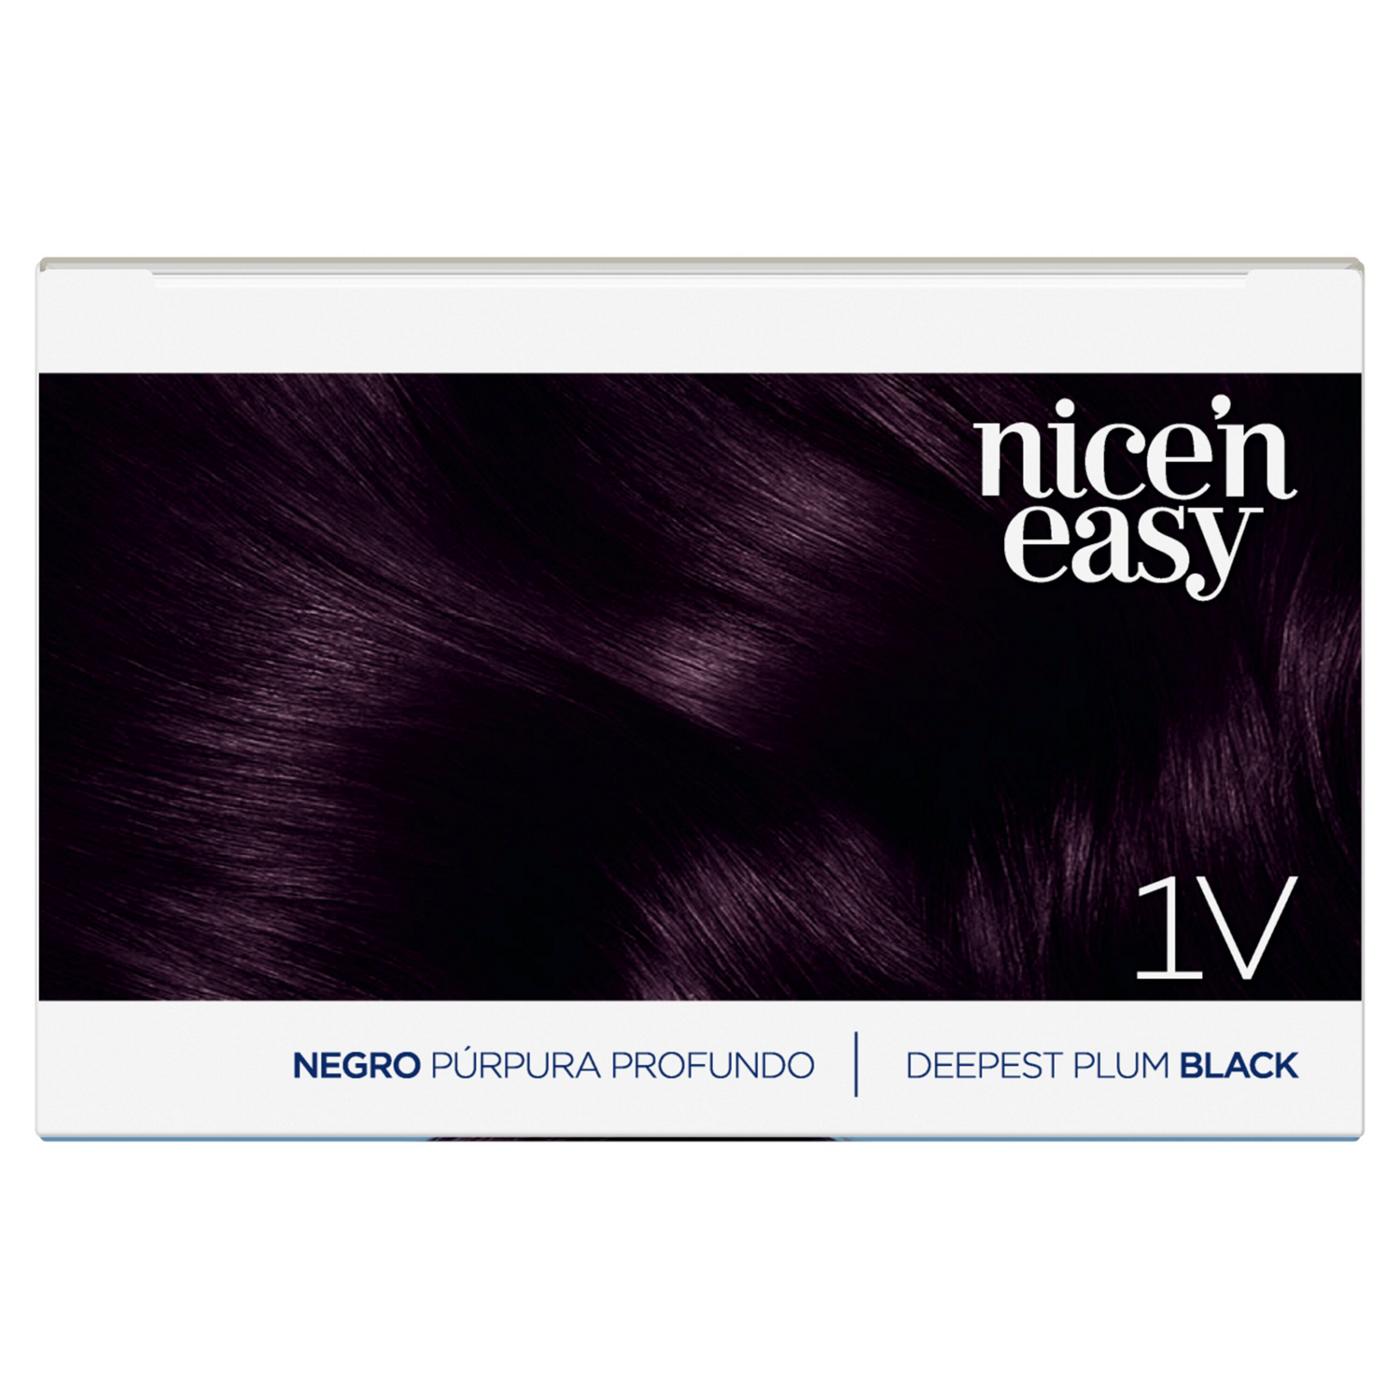 Clairol Nice 'N Easy Permanent Hair Color 1V Deepest Plum Black; image 6 of 7